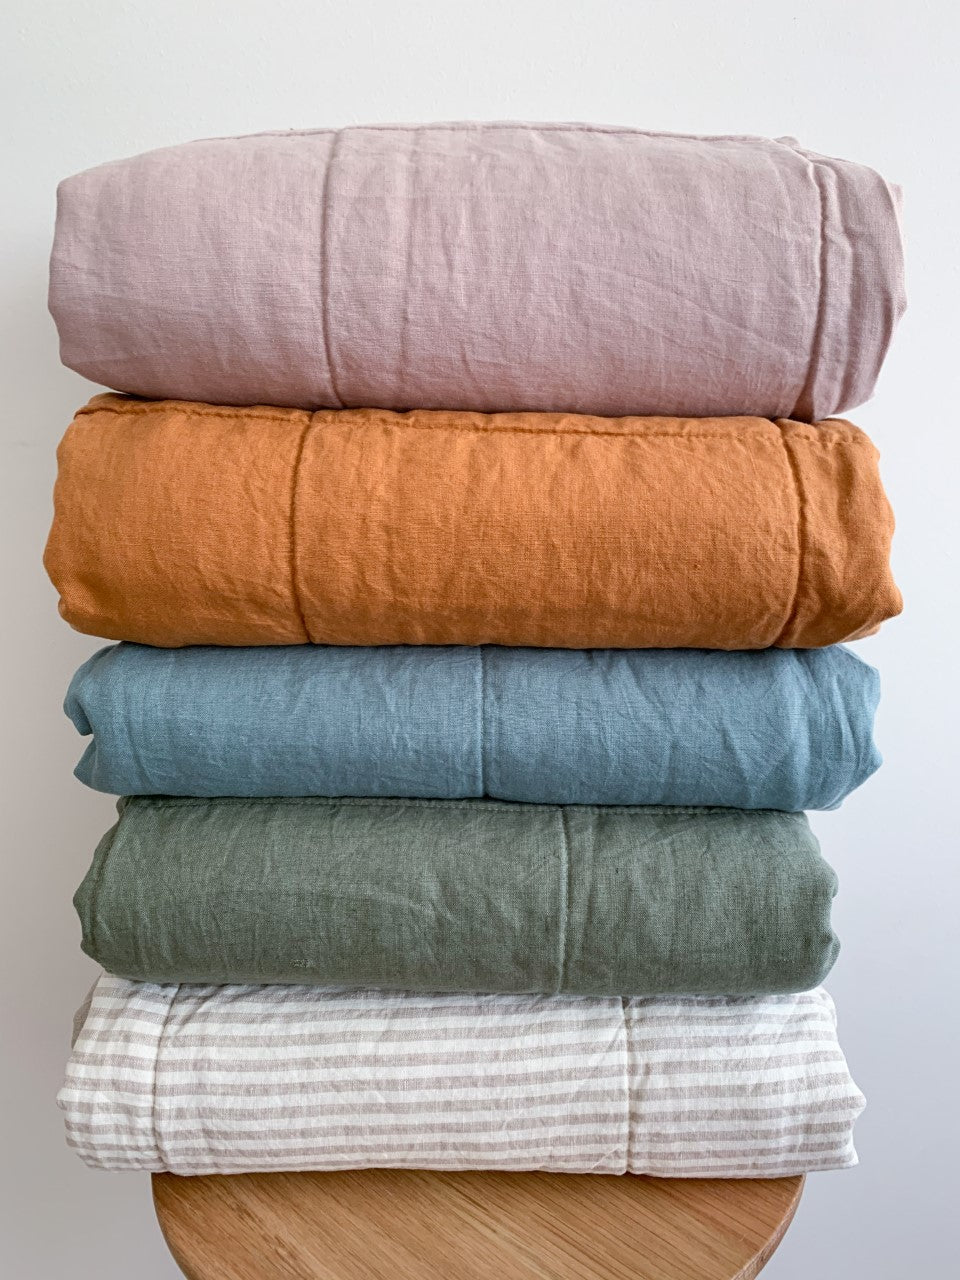 5 Good Reasons to Love and Appreciate Linen - Petite Co au